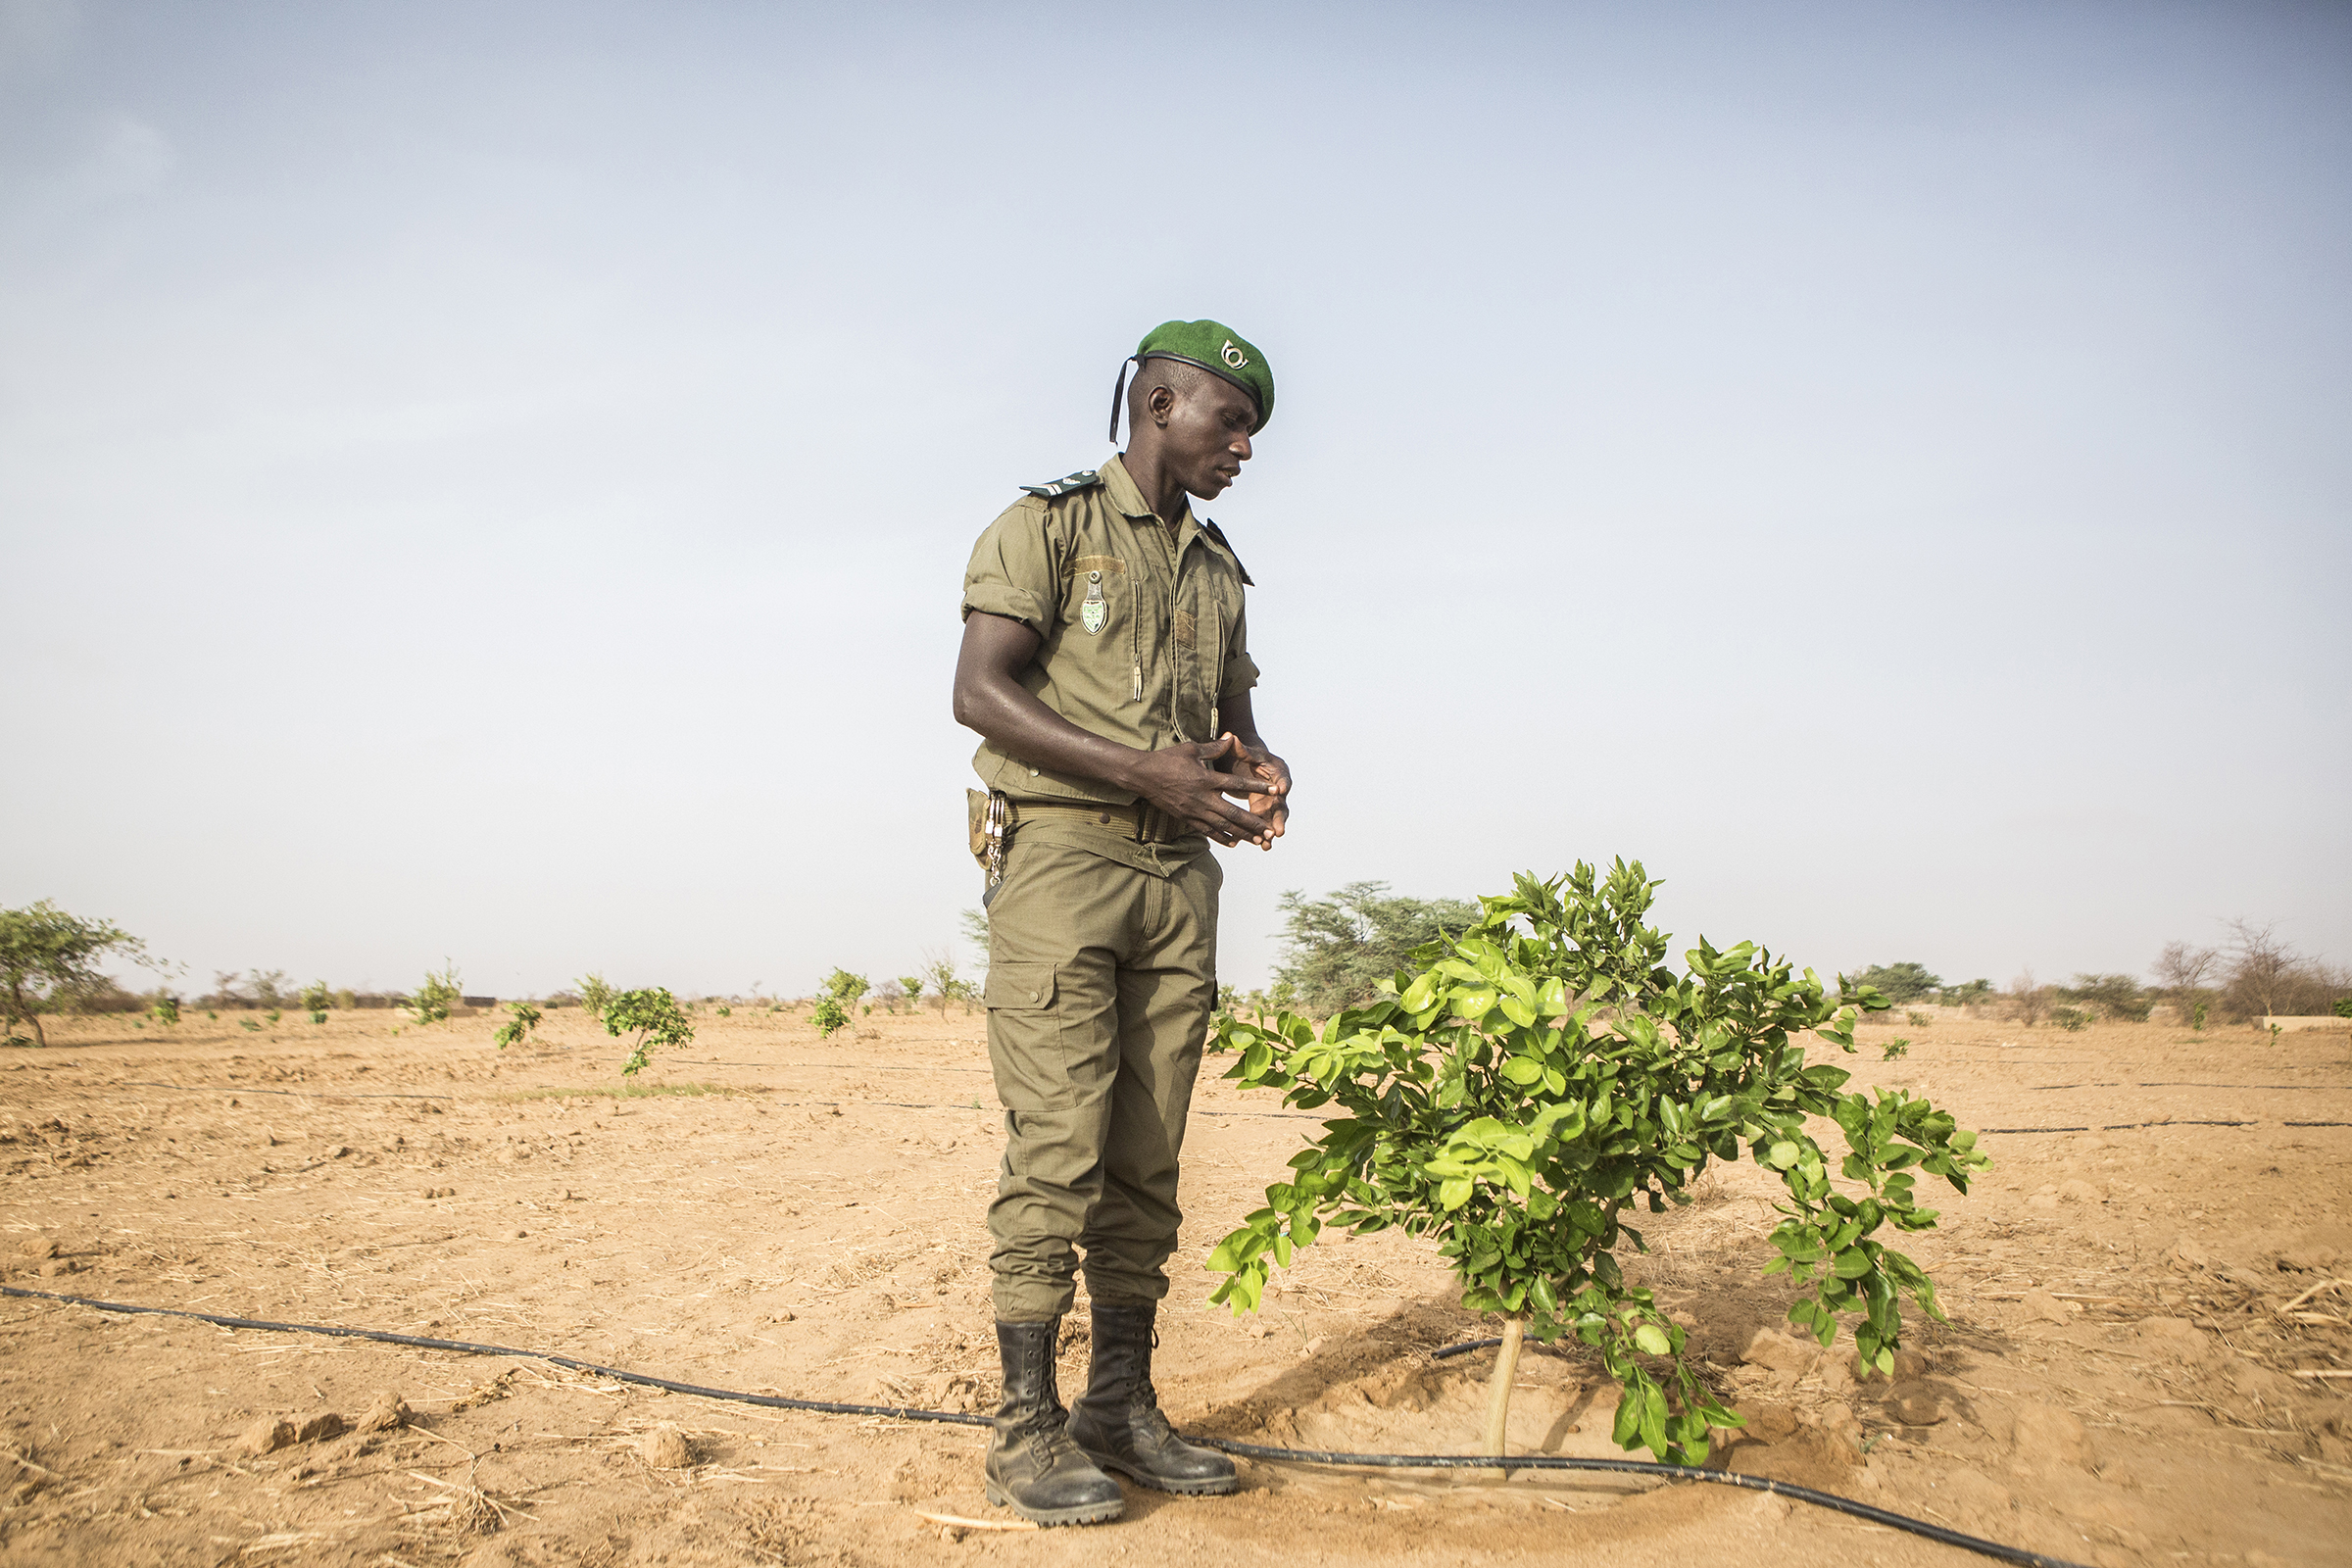 enegal- El Haji Gouebiaby, Base Chief for the Great Green Wall, stands beside a growing lemo; a base chief for the Great Green Wall tends to a lemon tree in Mbar Toubab